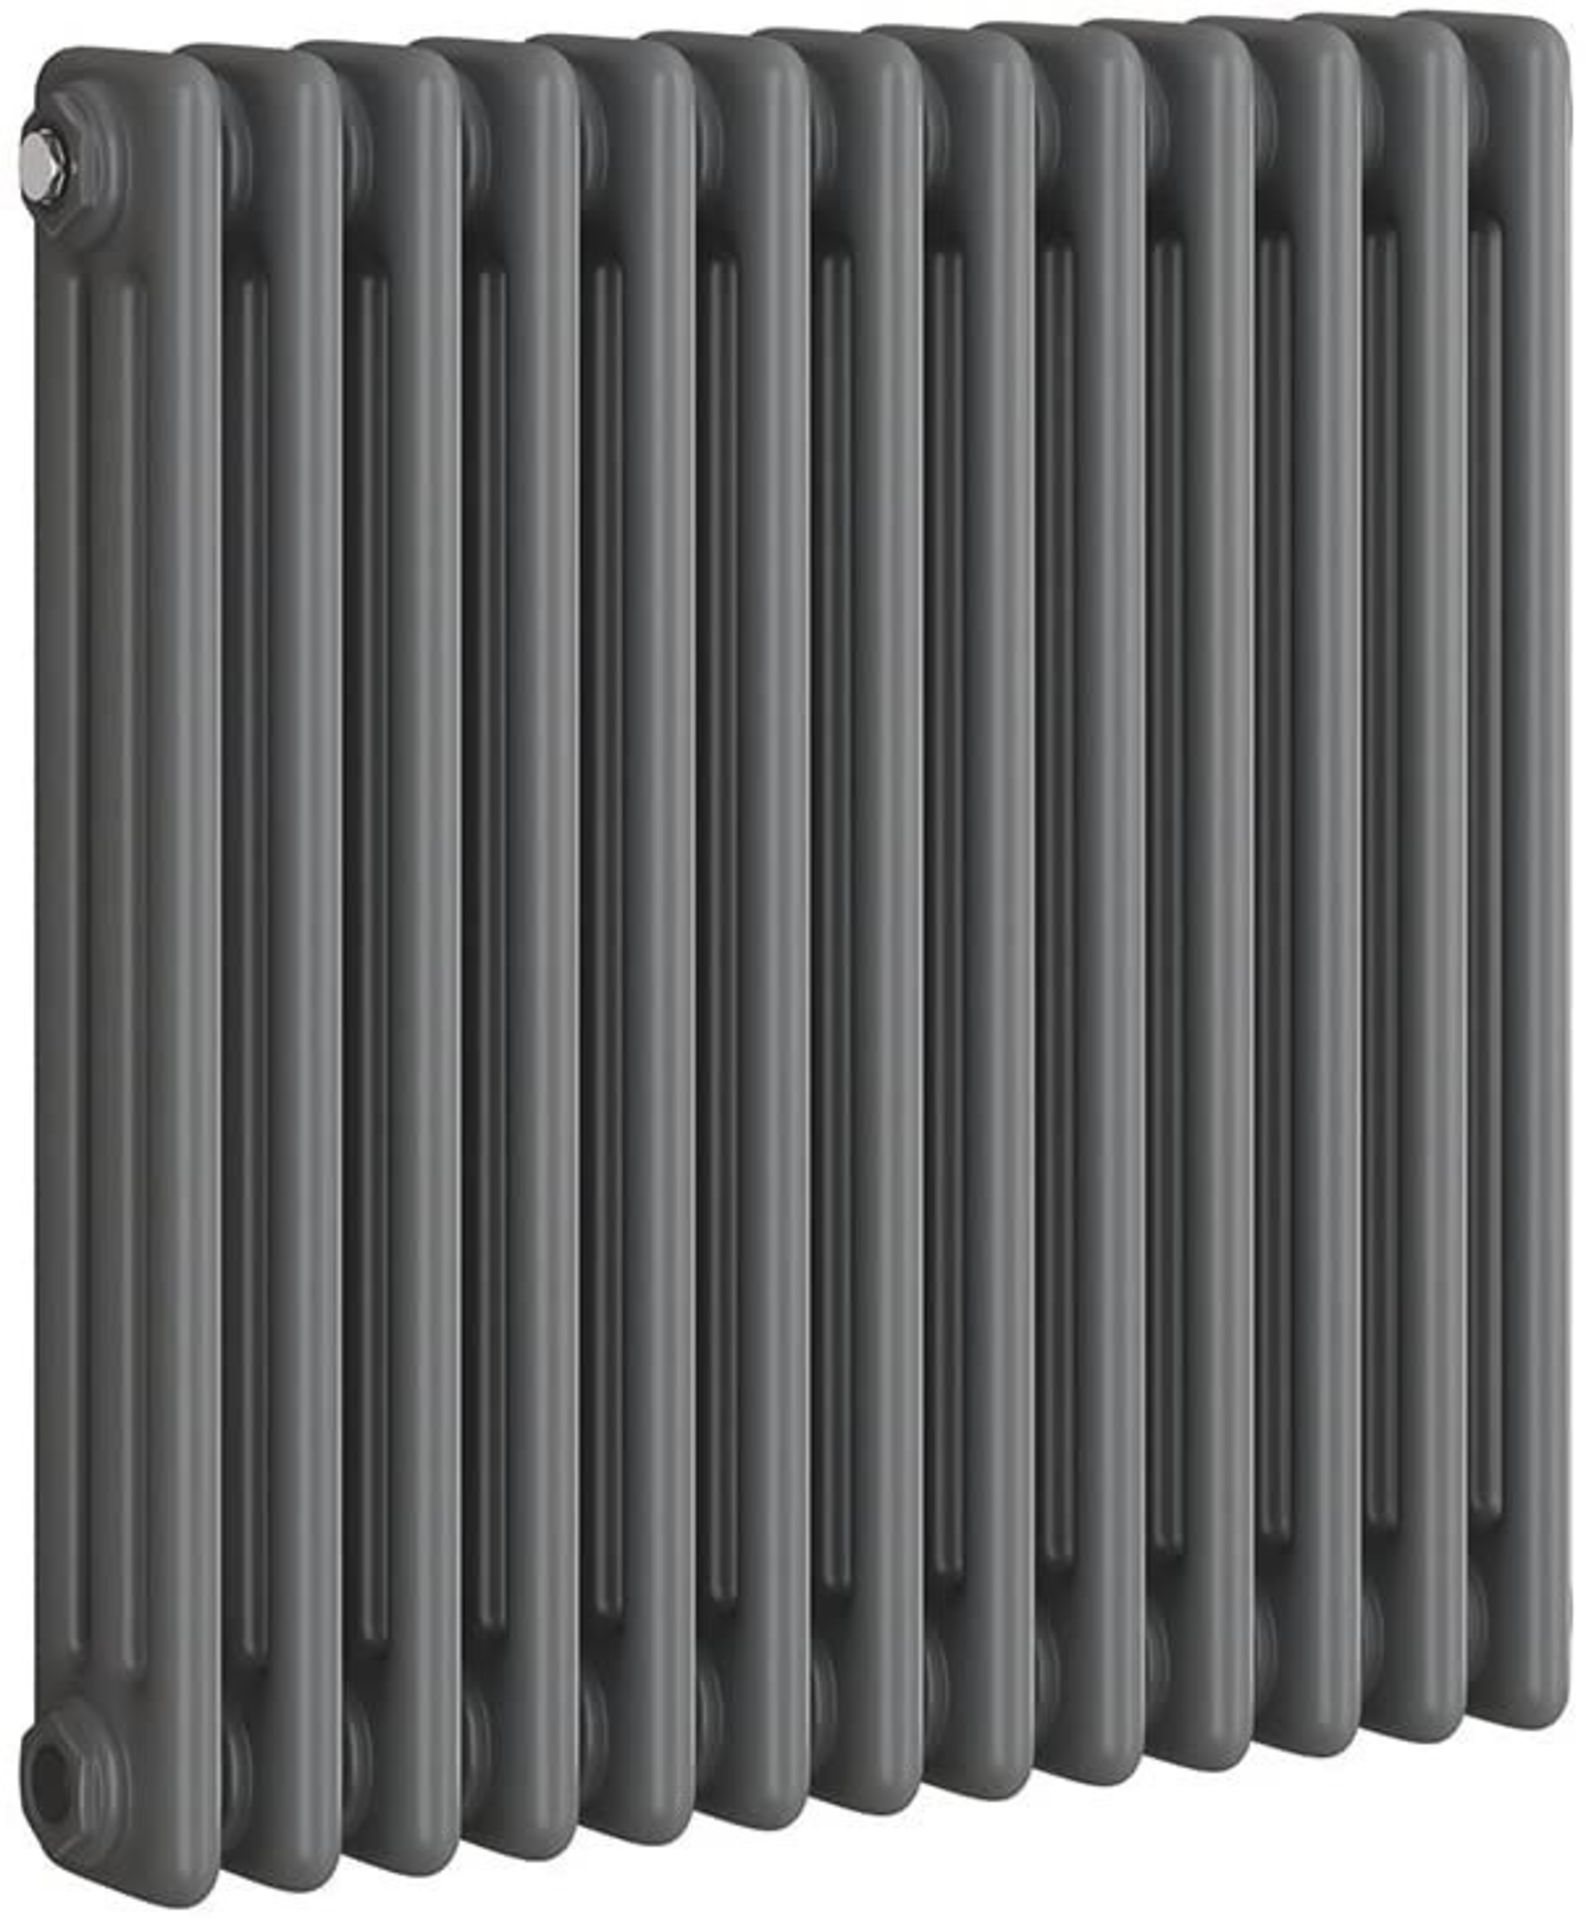 600x600mm Anthracite Double Panel Horizontal Colosseum Traditional Radiator.RRP £469.99.Create... - Image 3 of 3